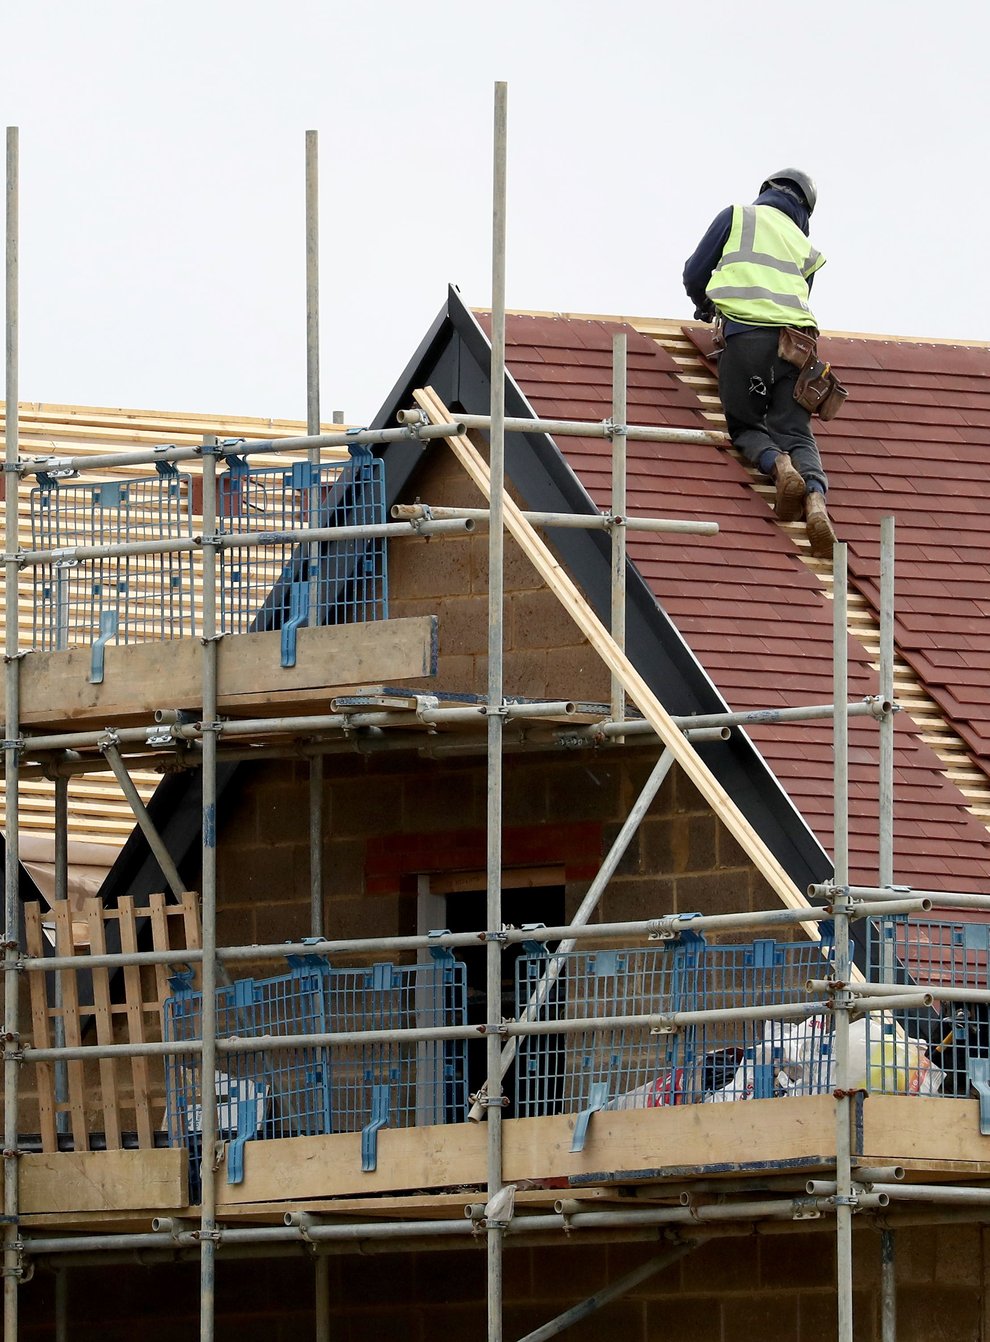 Housebuilders have seen their shares surge higher after the Chancellor’s move to slash stamp duty and announce major reforms of Briton’s planning system. Photo credit should read: Gareth Fuller/PA Wire